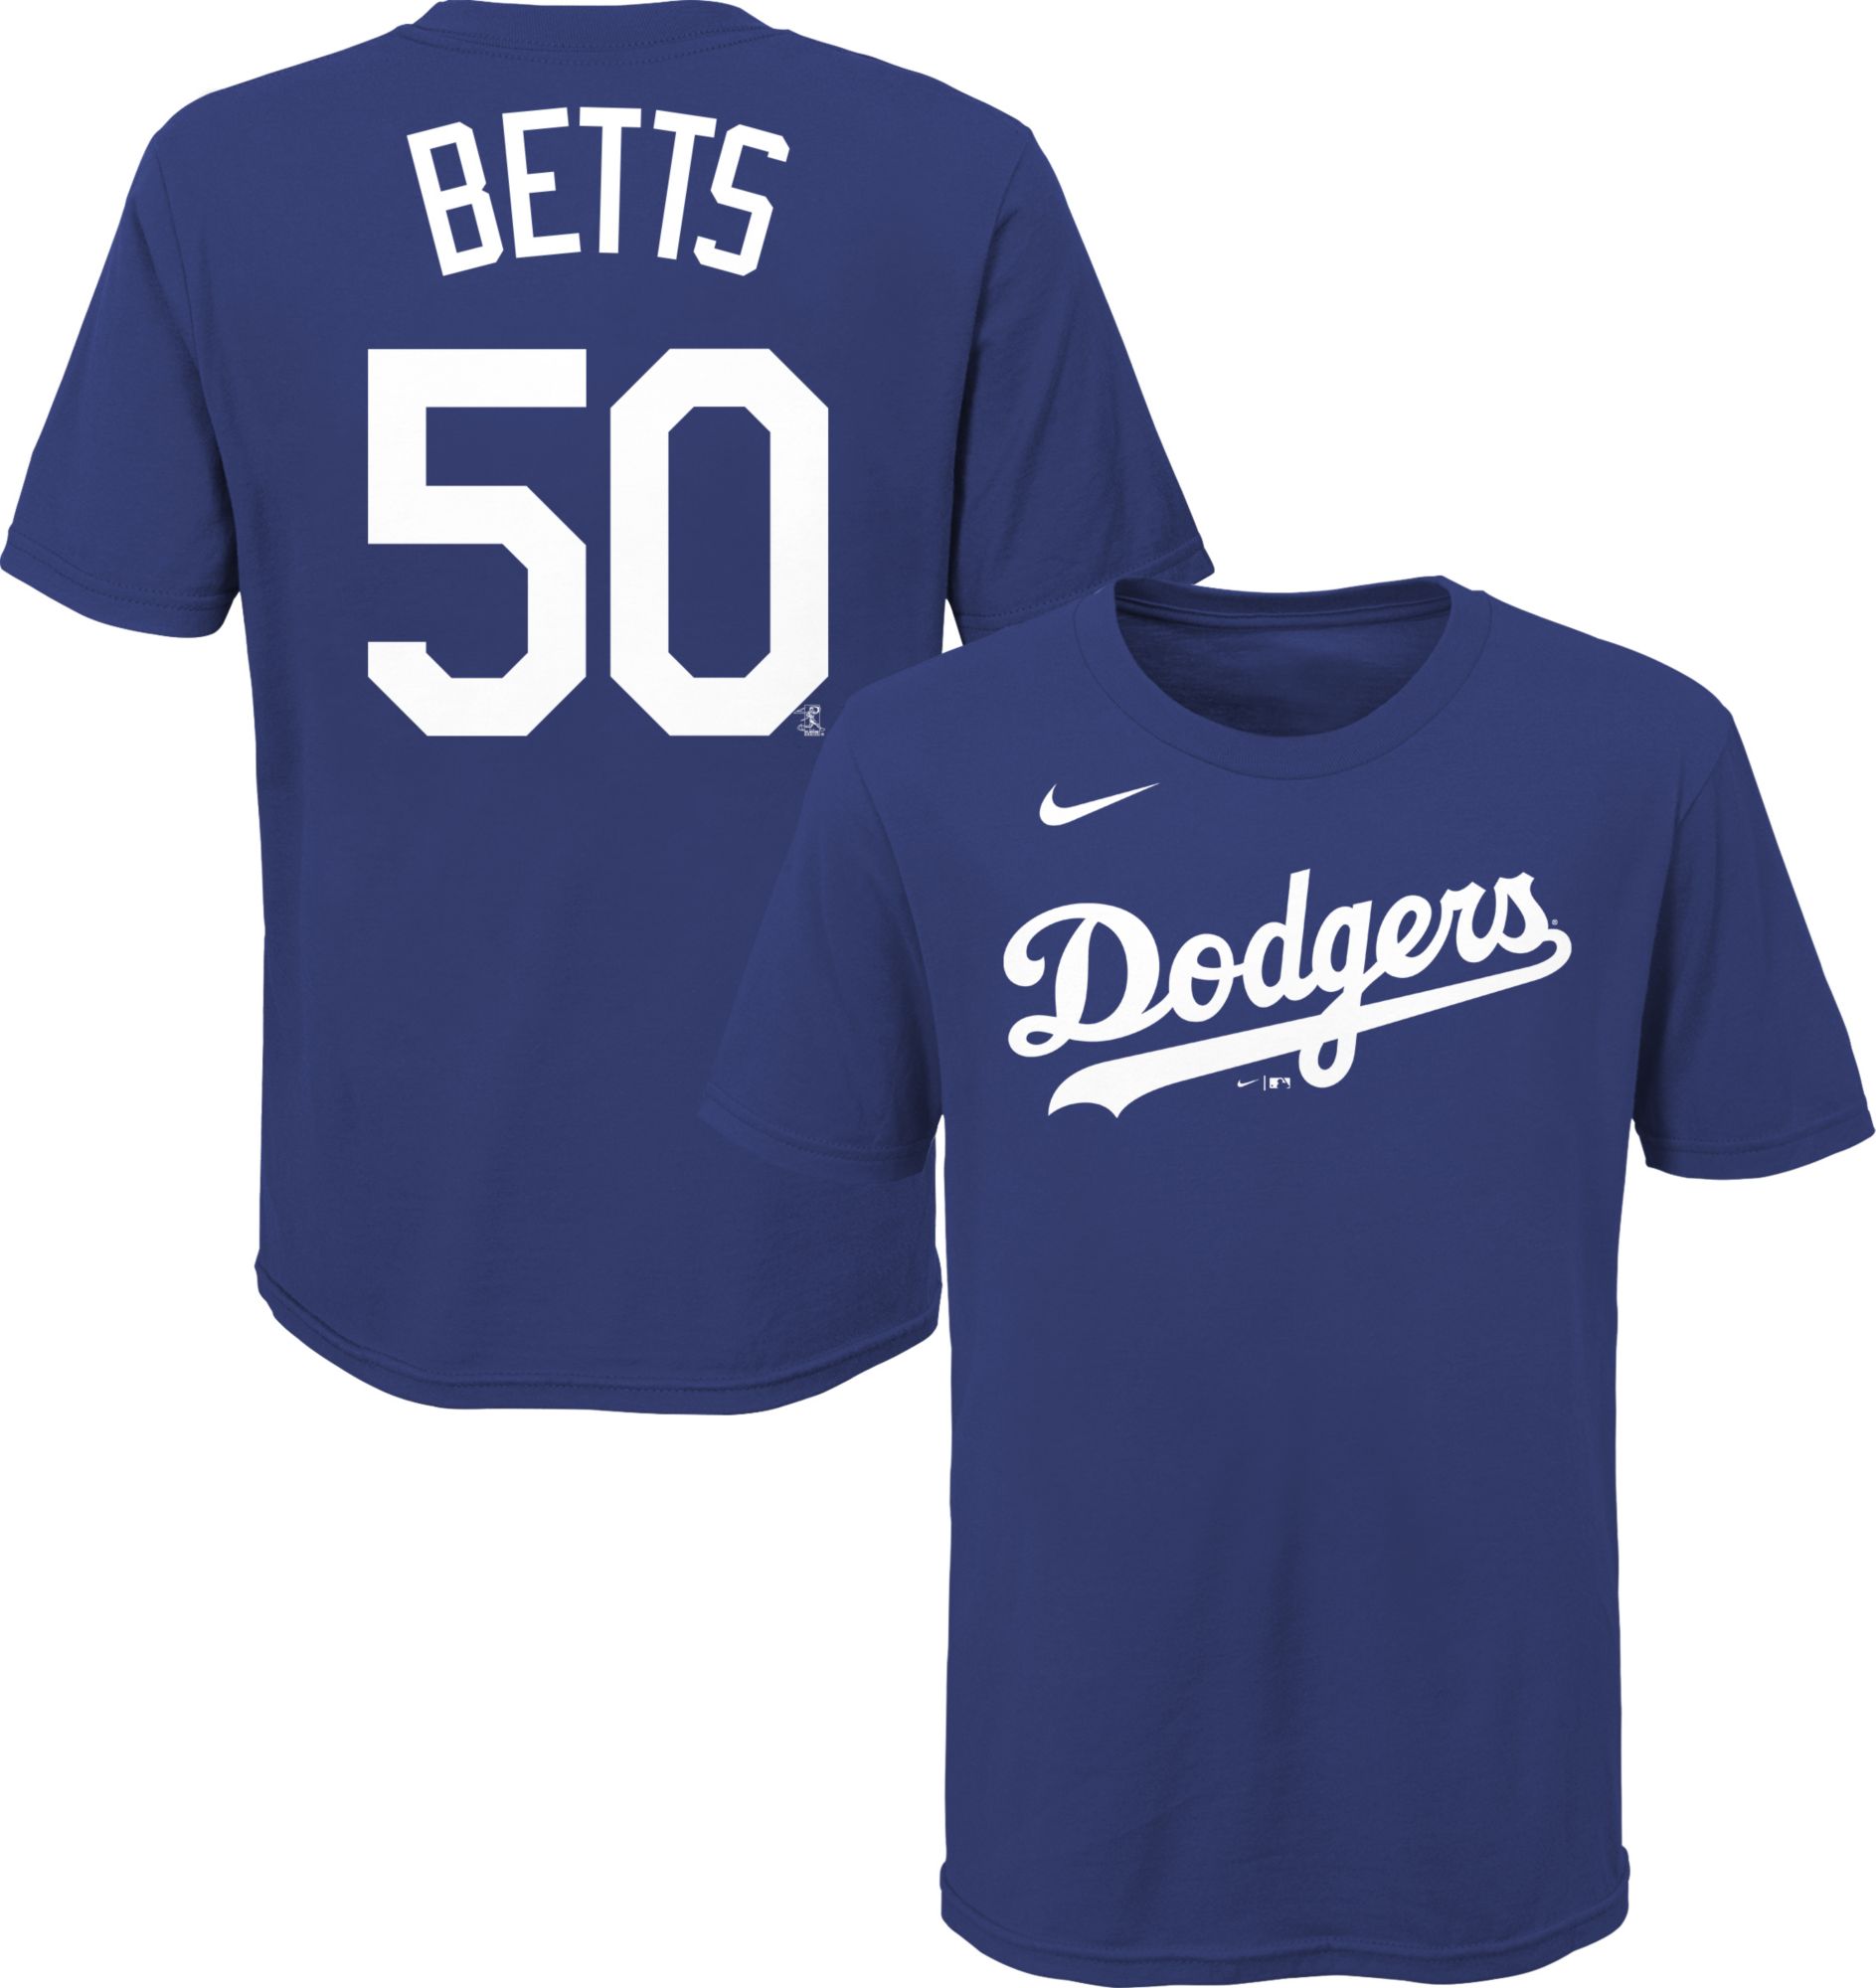 Nike Men's Los Angeles Dodgers Will Smith #16 White Cool Base Jersey